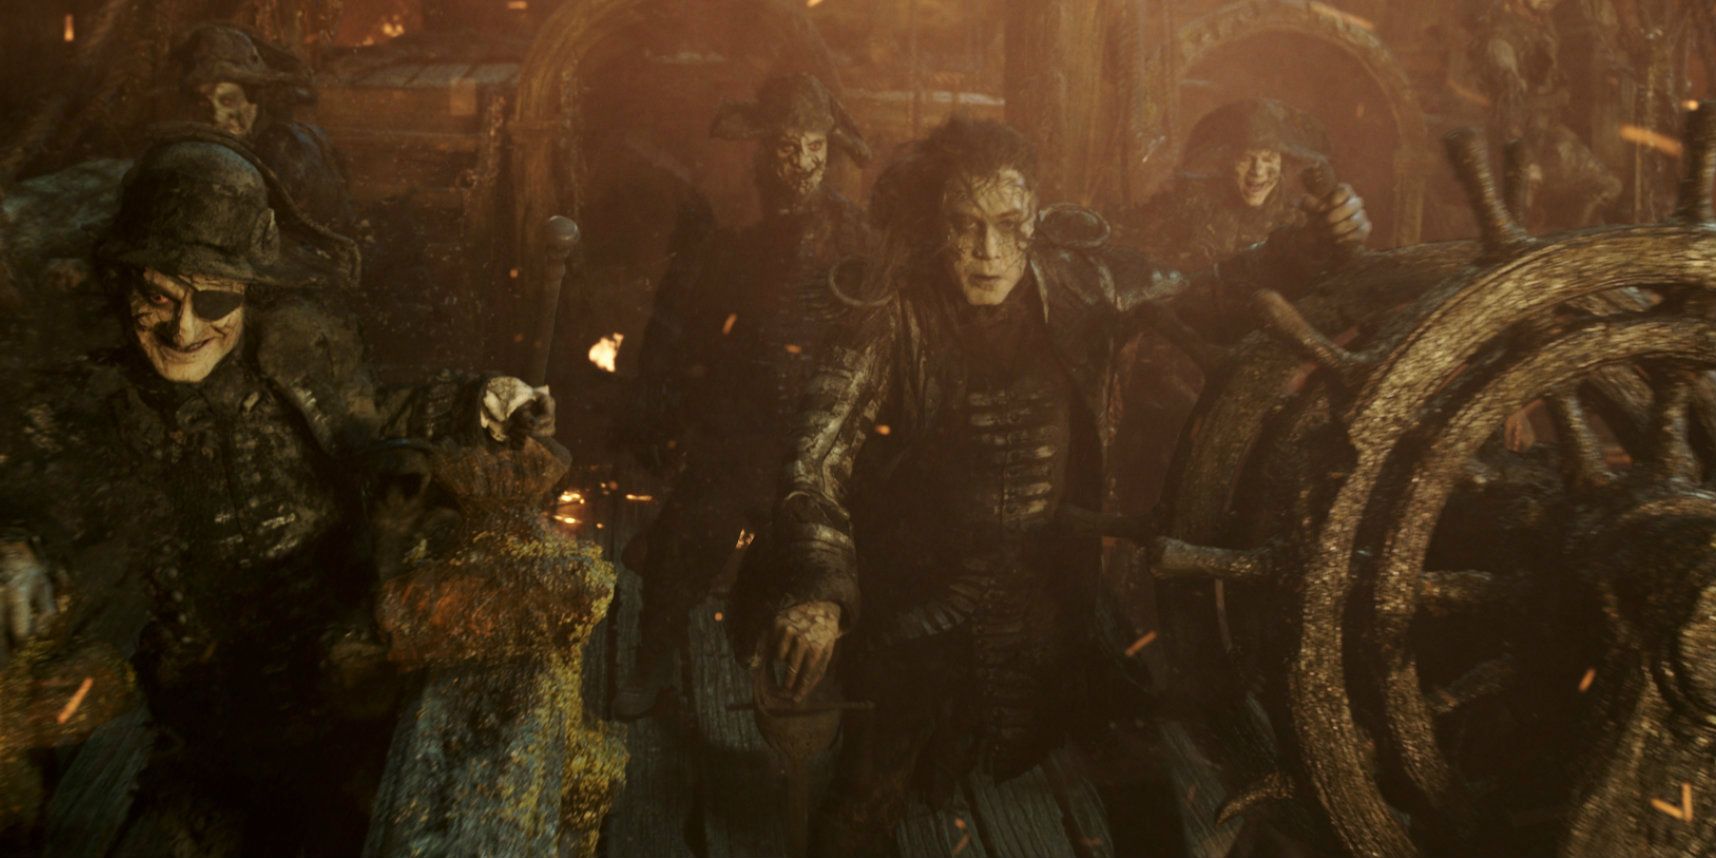 Pirates of the Caribbean 5 - Salazar (Javier Bardem) and his crew